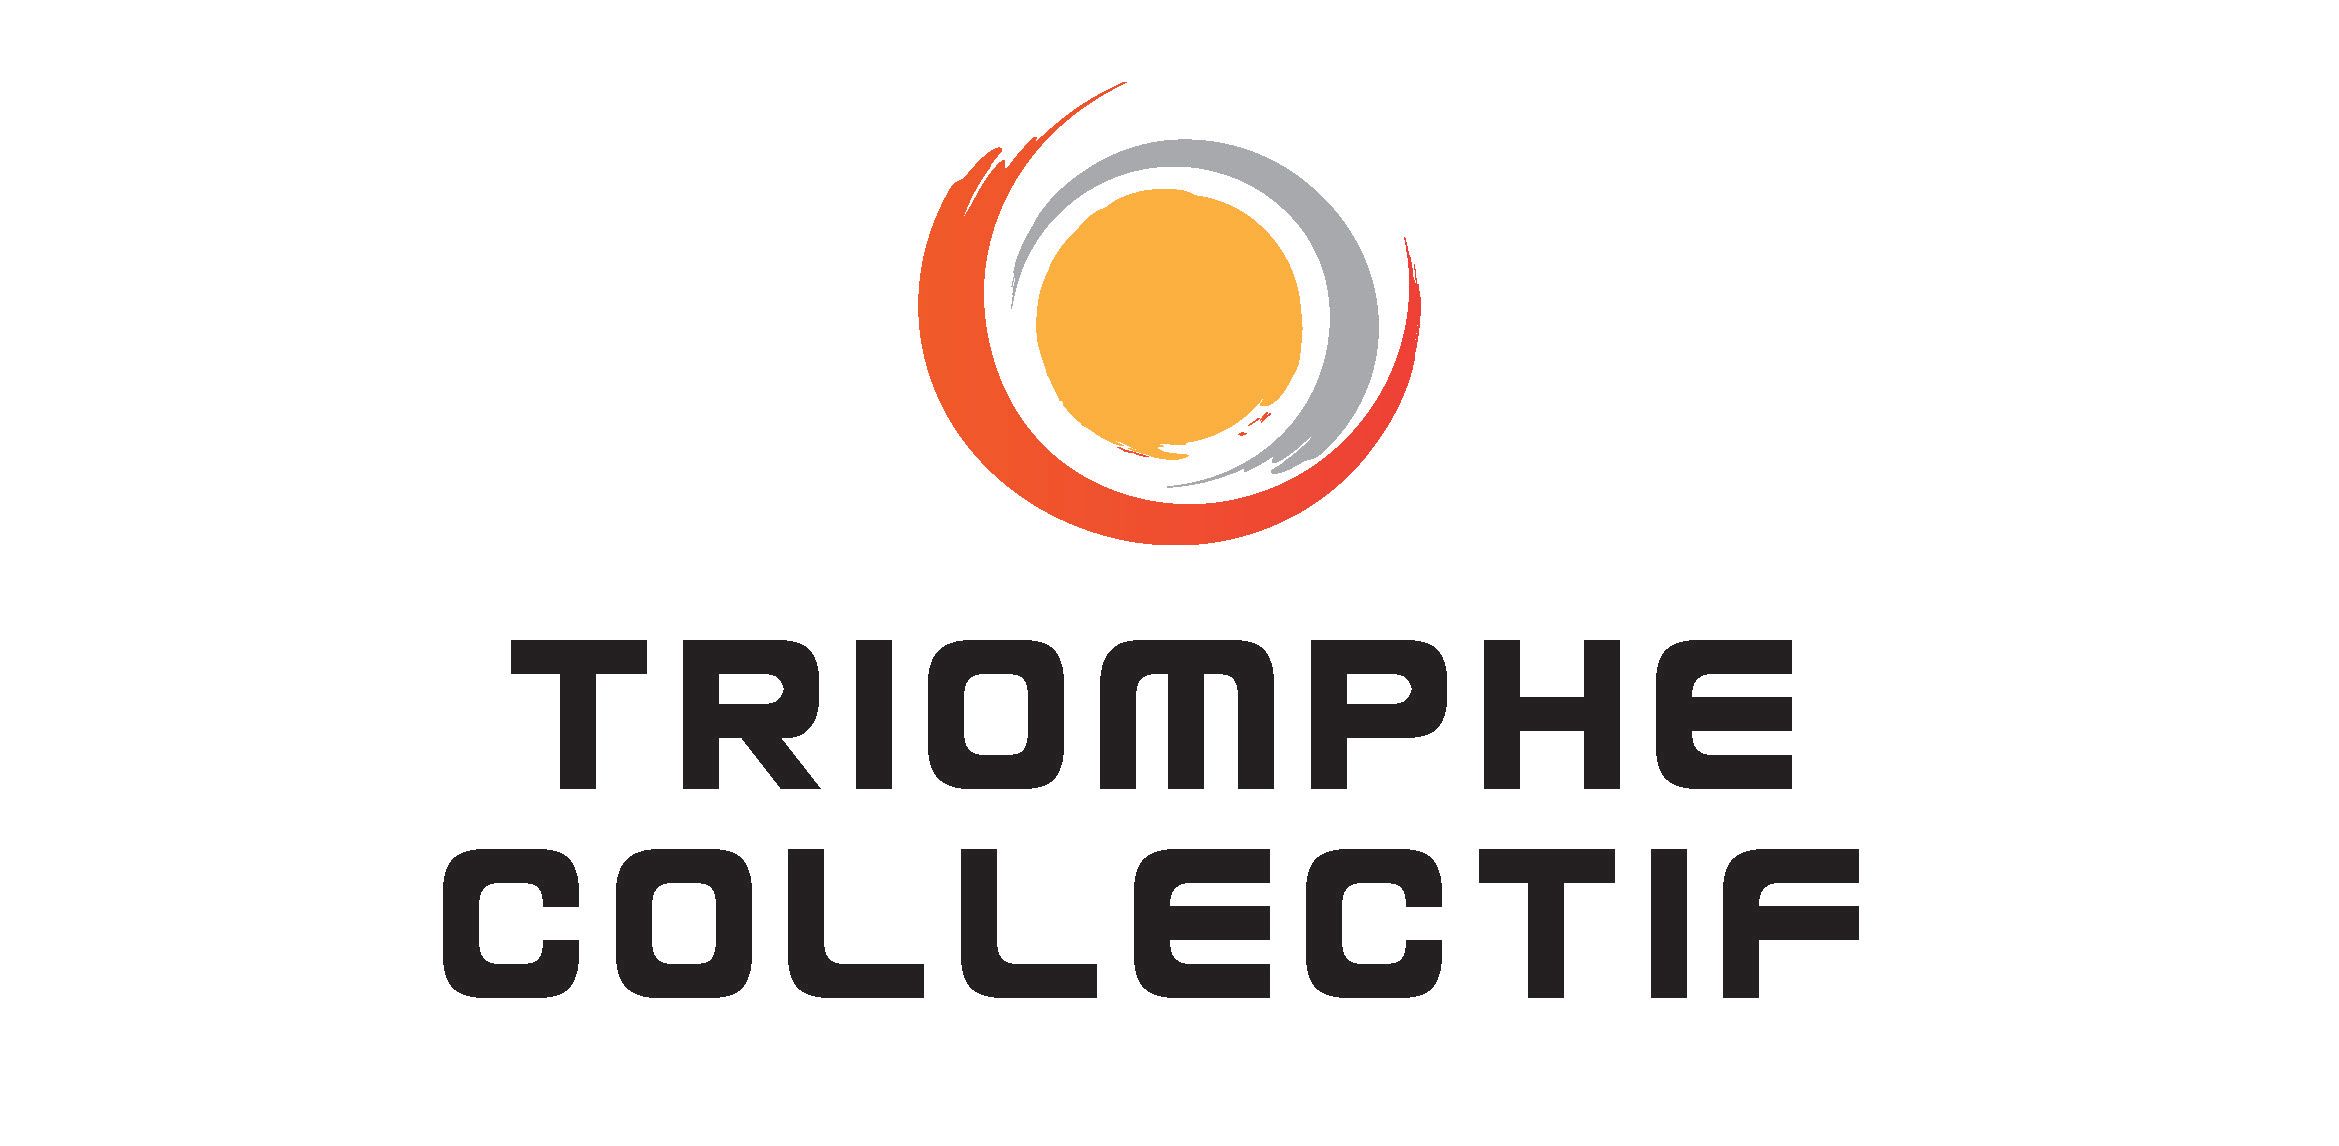 Triomphecollectif